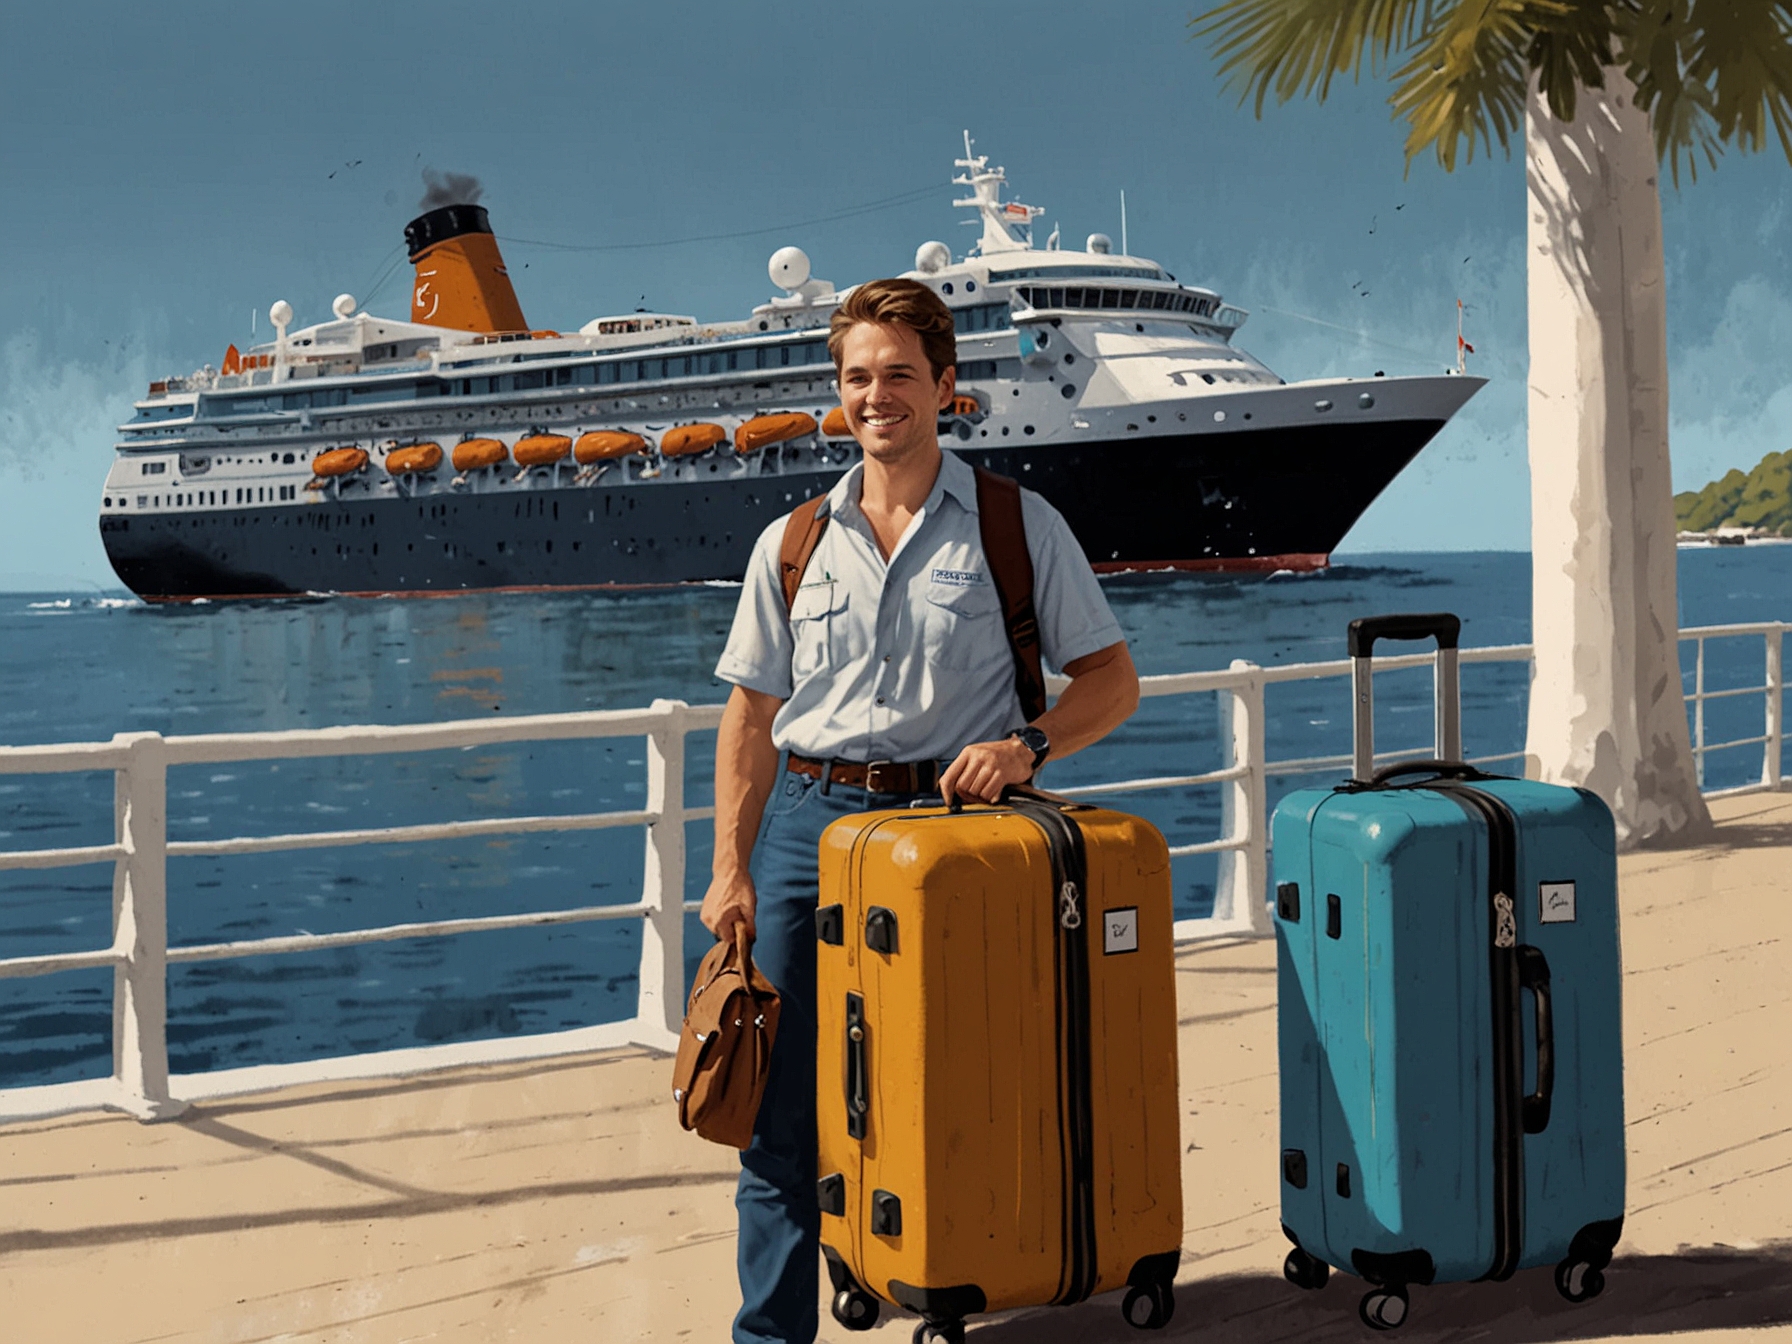 Marty and Jess Jackson boarding another cruise ship, smiling and holding their luggage, ready for their next adventure. The port in the background symbolizes their continuous voyages.